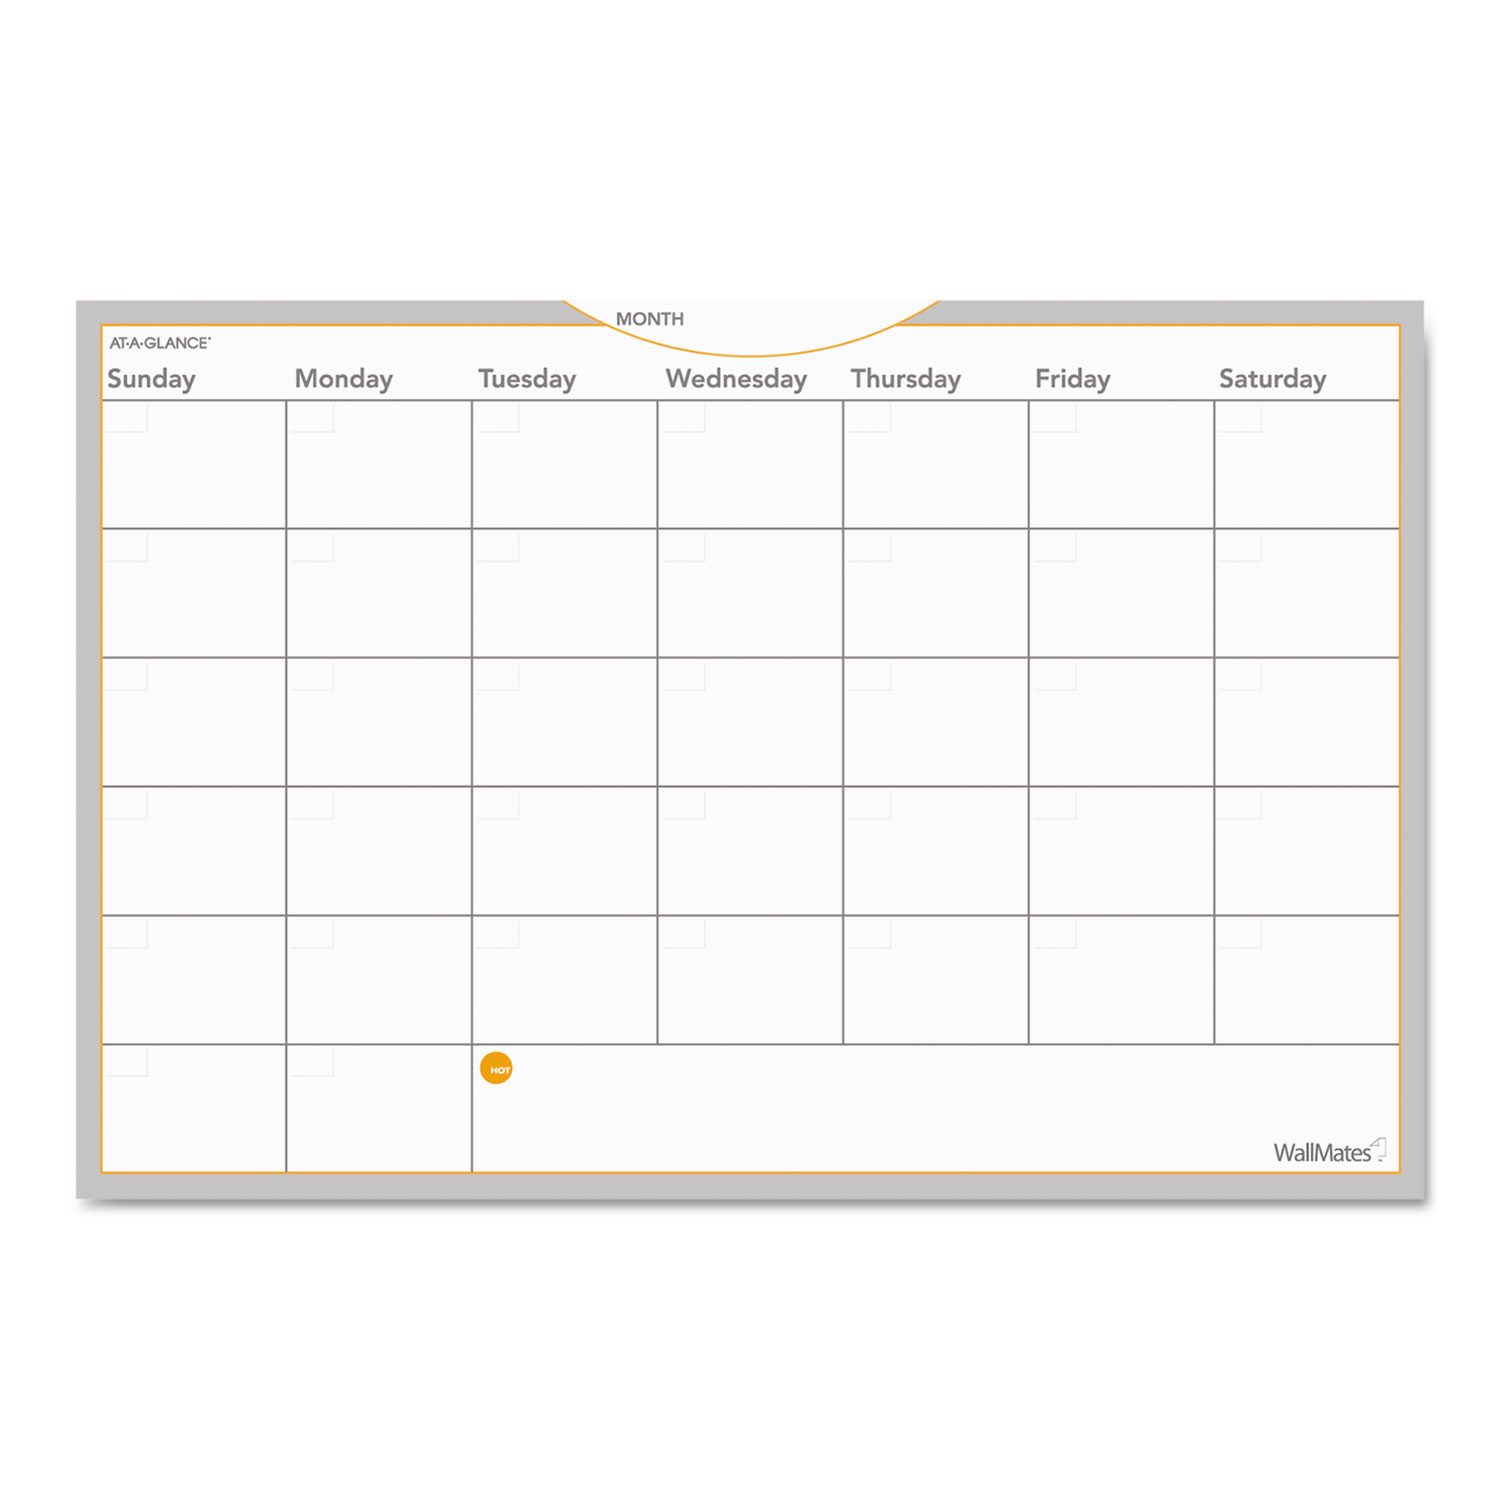  AT-A-GLANCE AW602028 WallMates Self-Adhesive Dry Erase Monthly Planning Surface, 36 x 24 (AAGAW602028) 